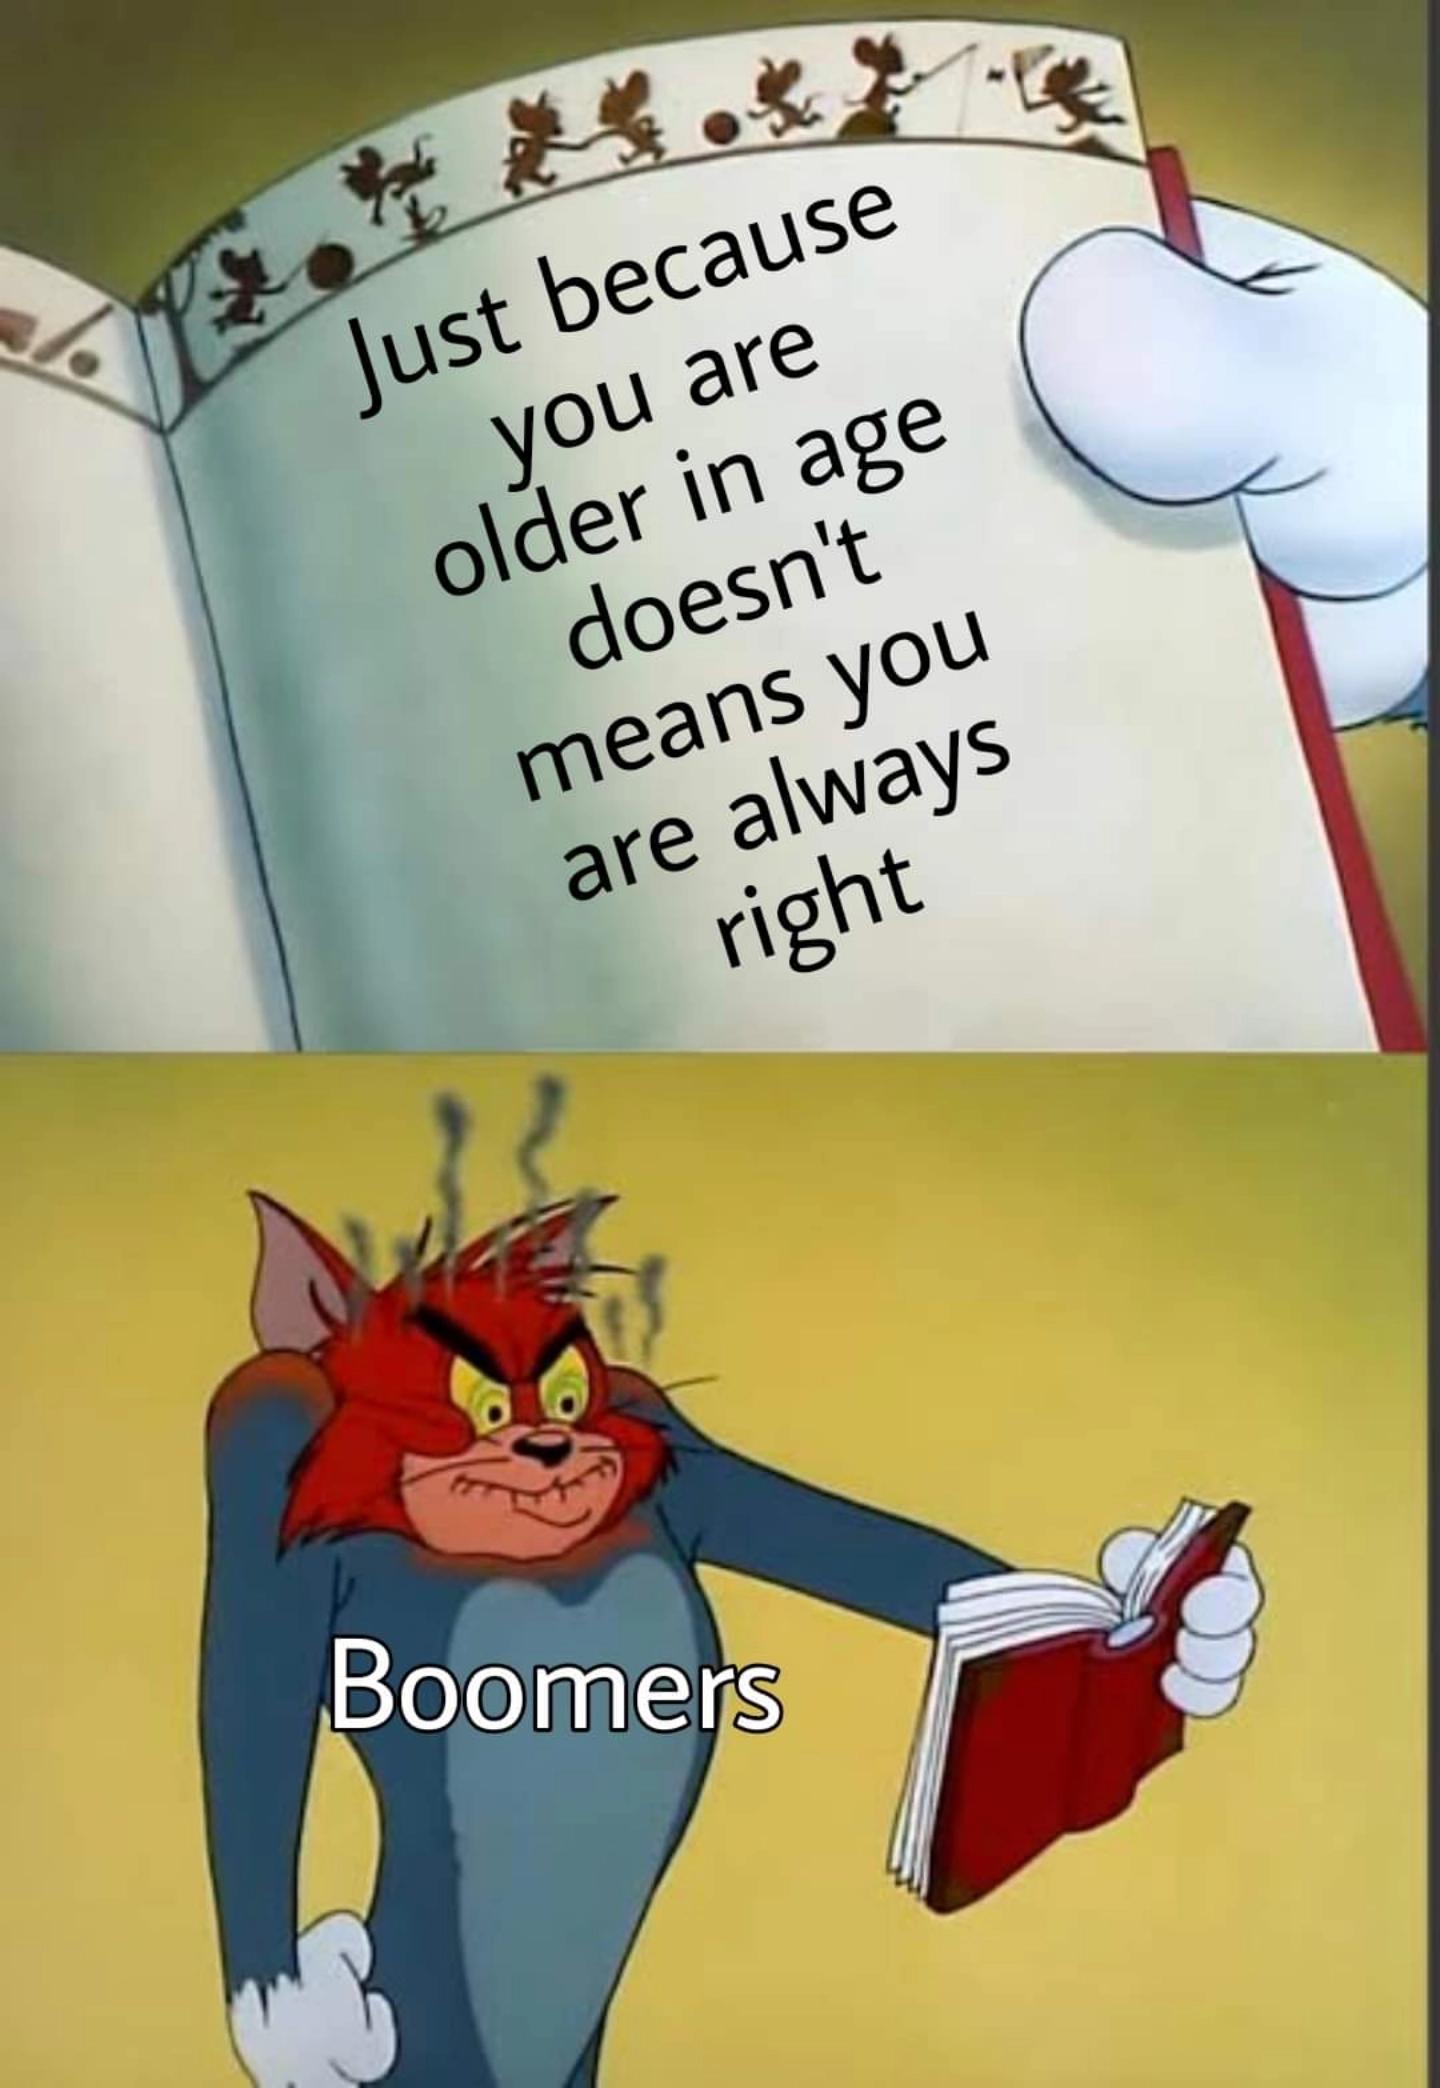 funny memes - dank memes - tom angry at book meme - Just because you are older in age doesn't means you are always right Boomers